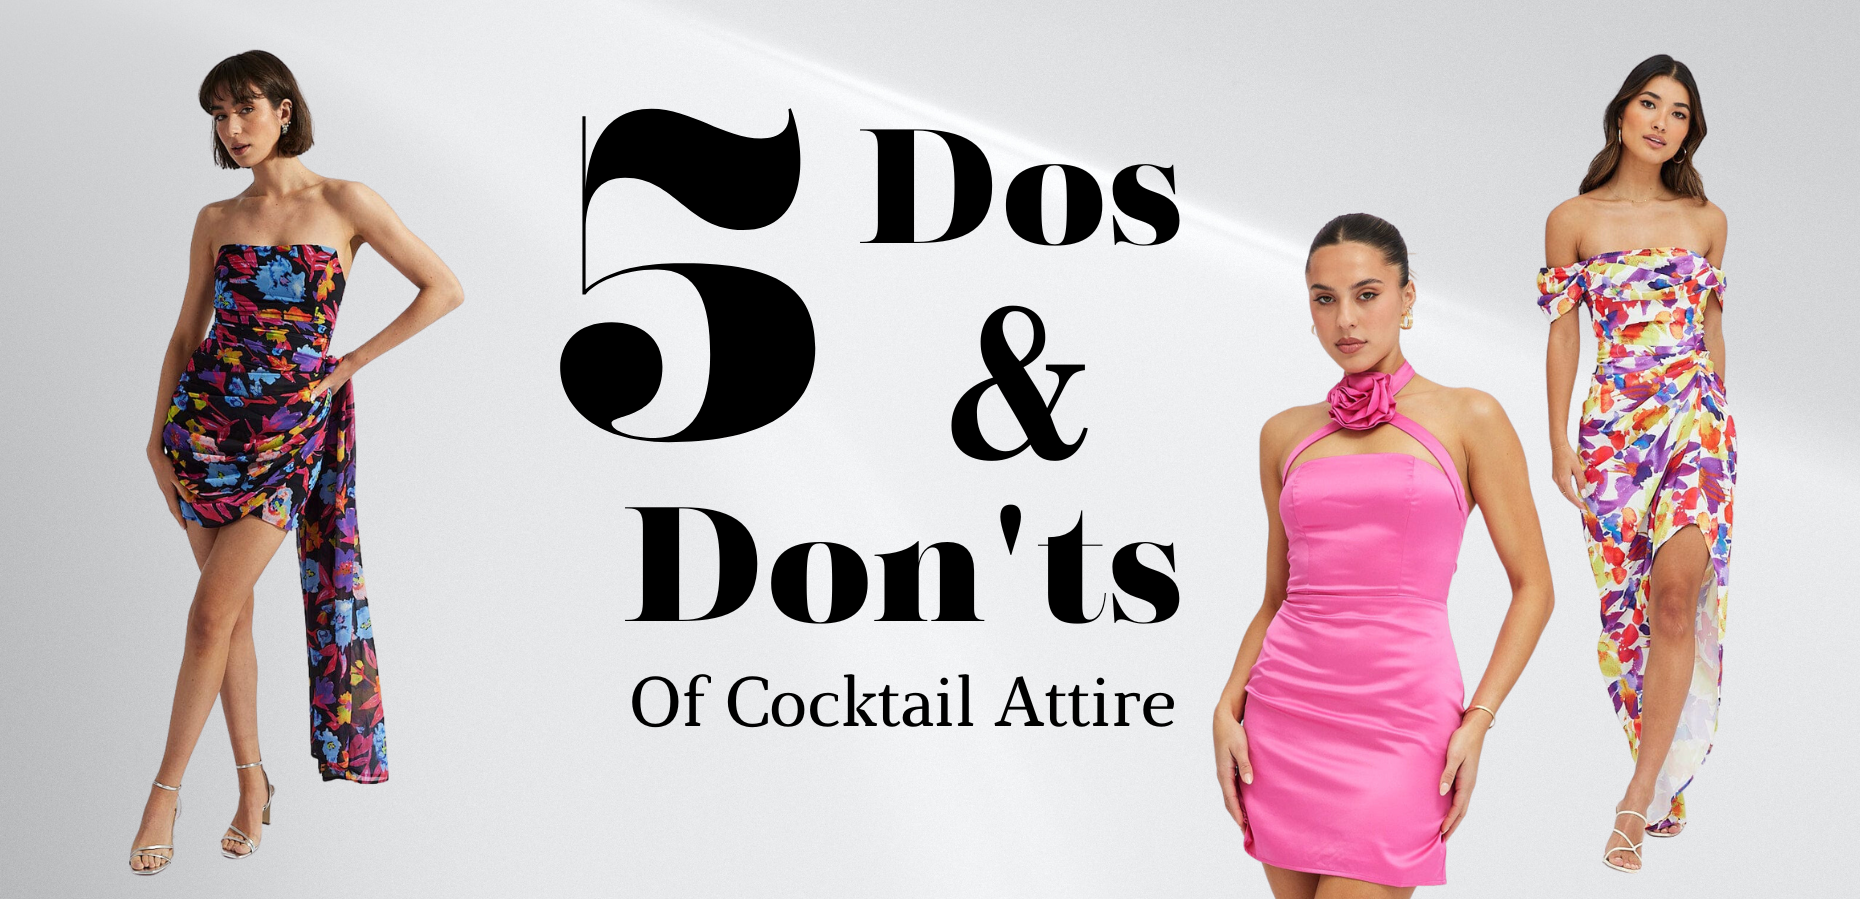 what is cocktail dress for a woman